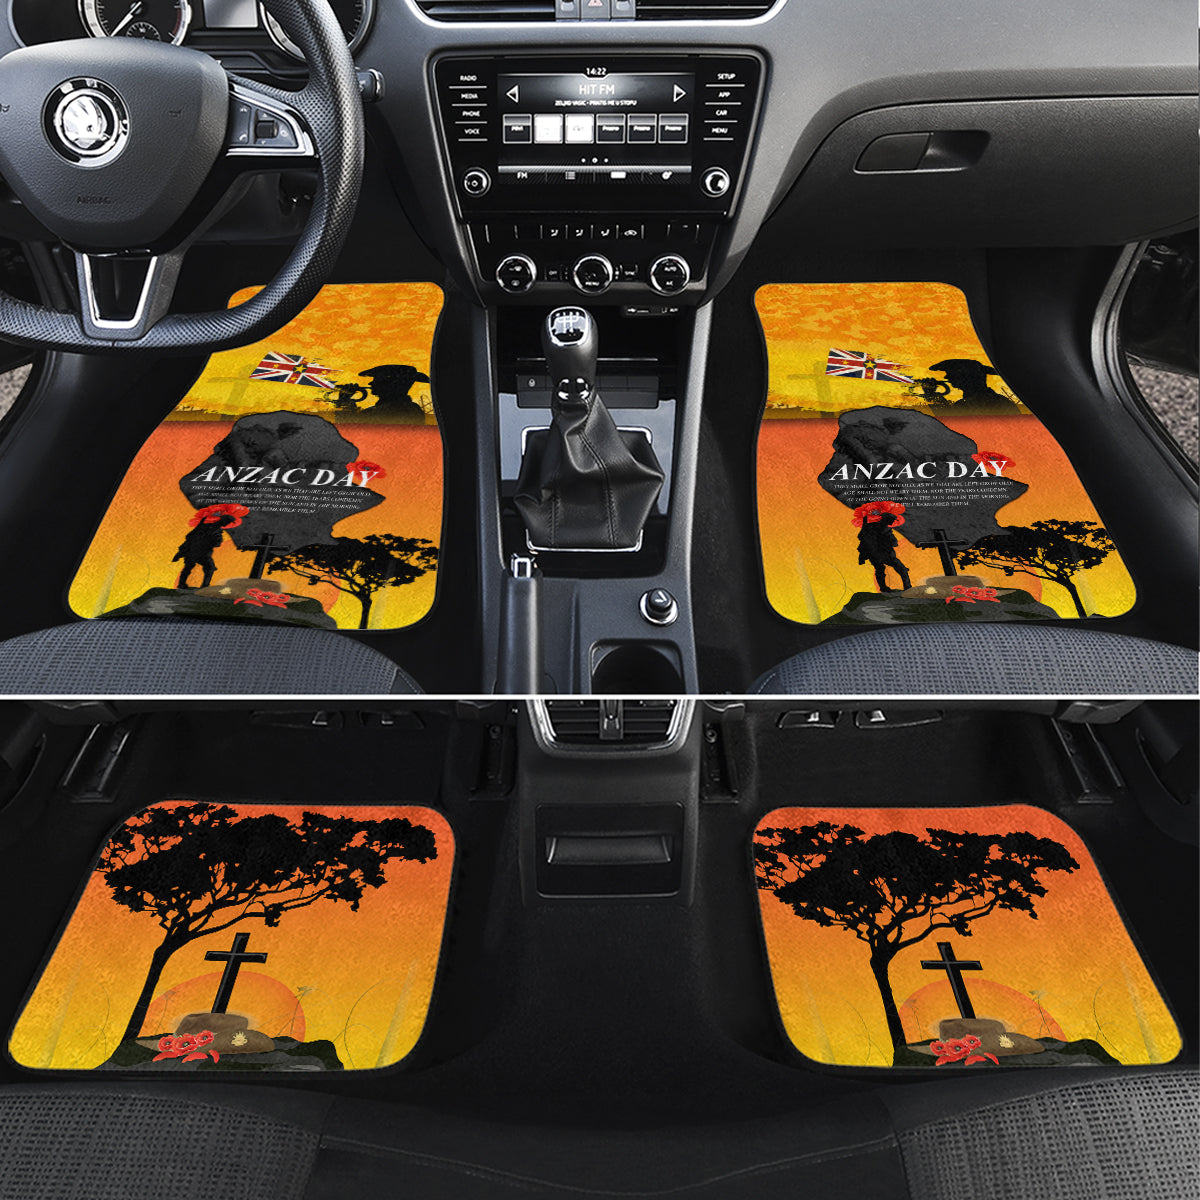 Niue ANZAC Day Car Mats Soldier and Gallipoli Lest We Forget LT03 Set 4pcs Yellow - Polynesian Pride